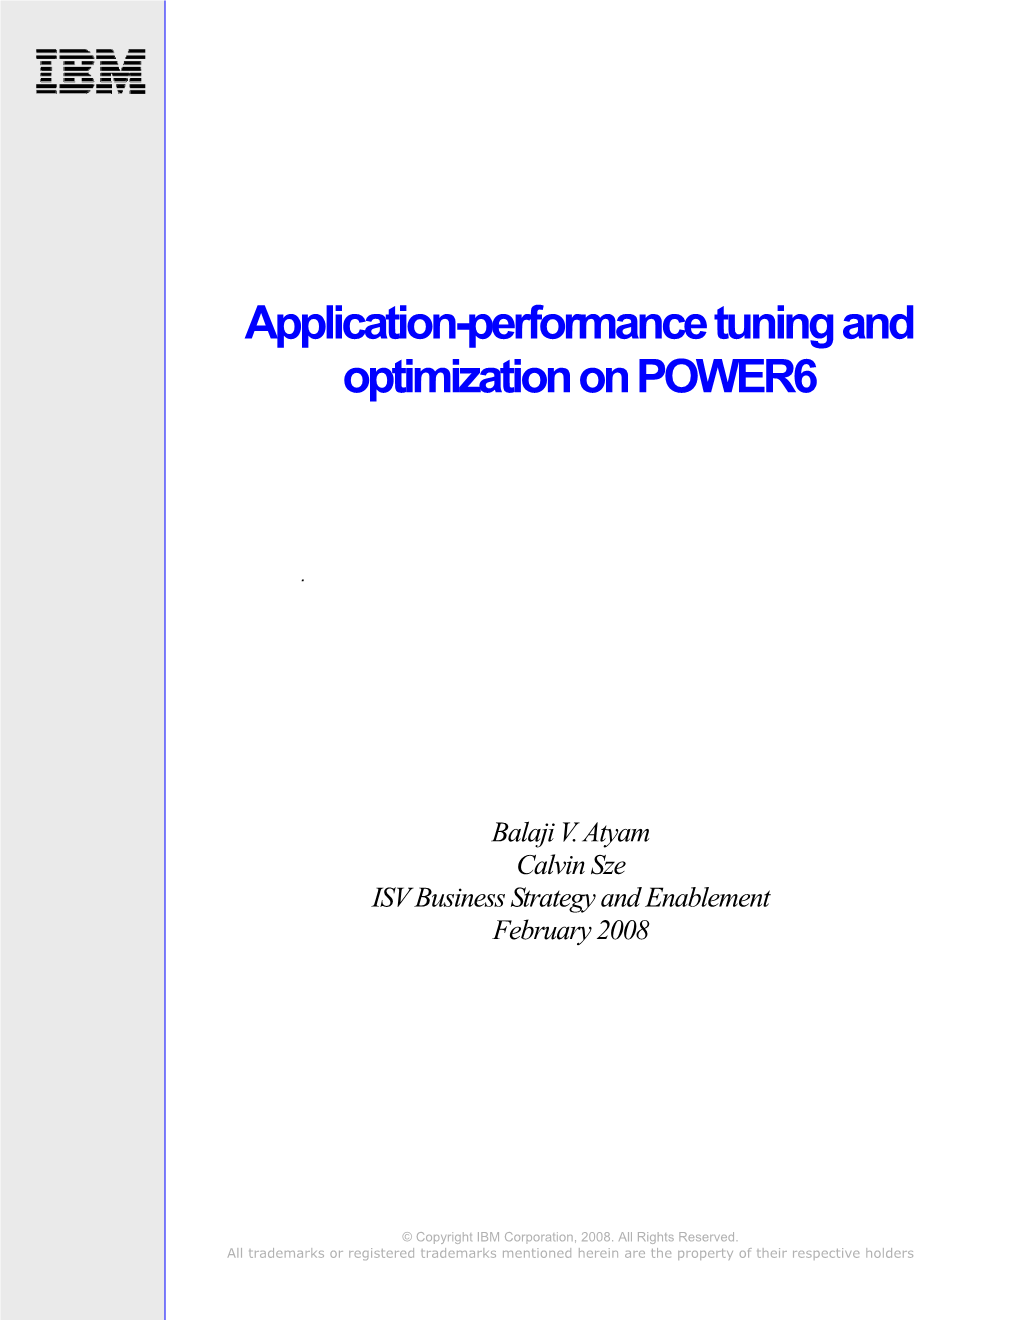 Application-Performance Tuning and Optimization on POWER6